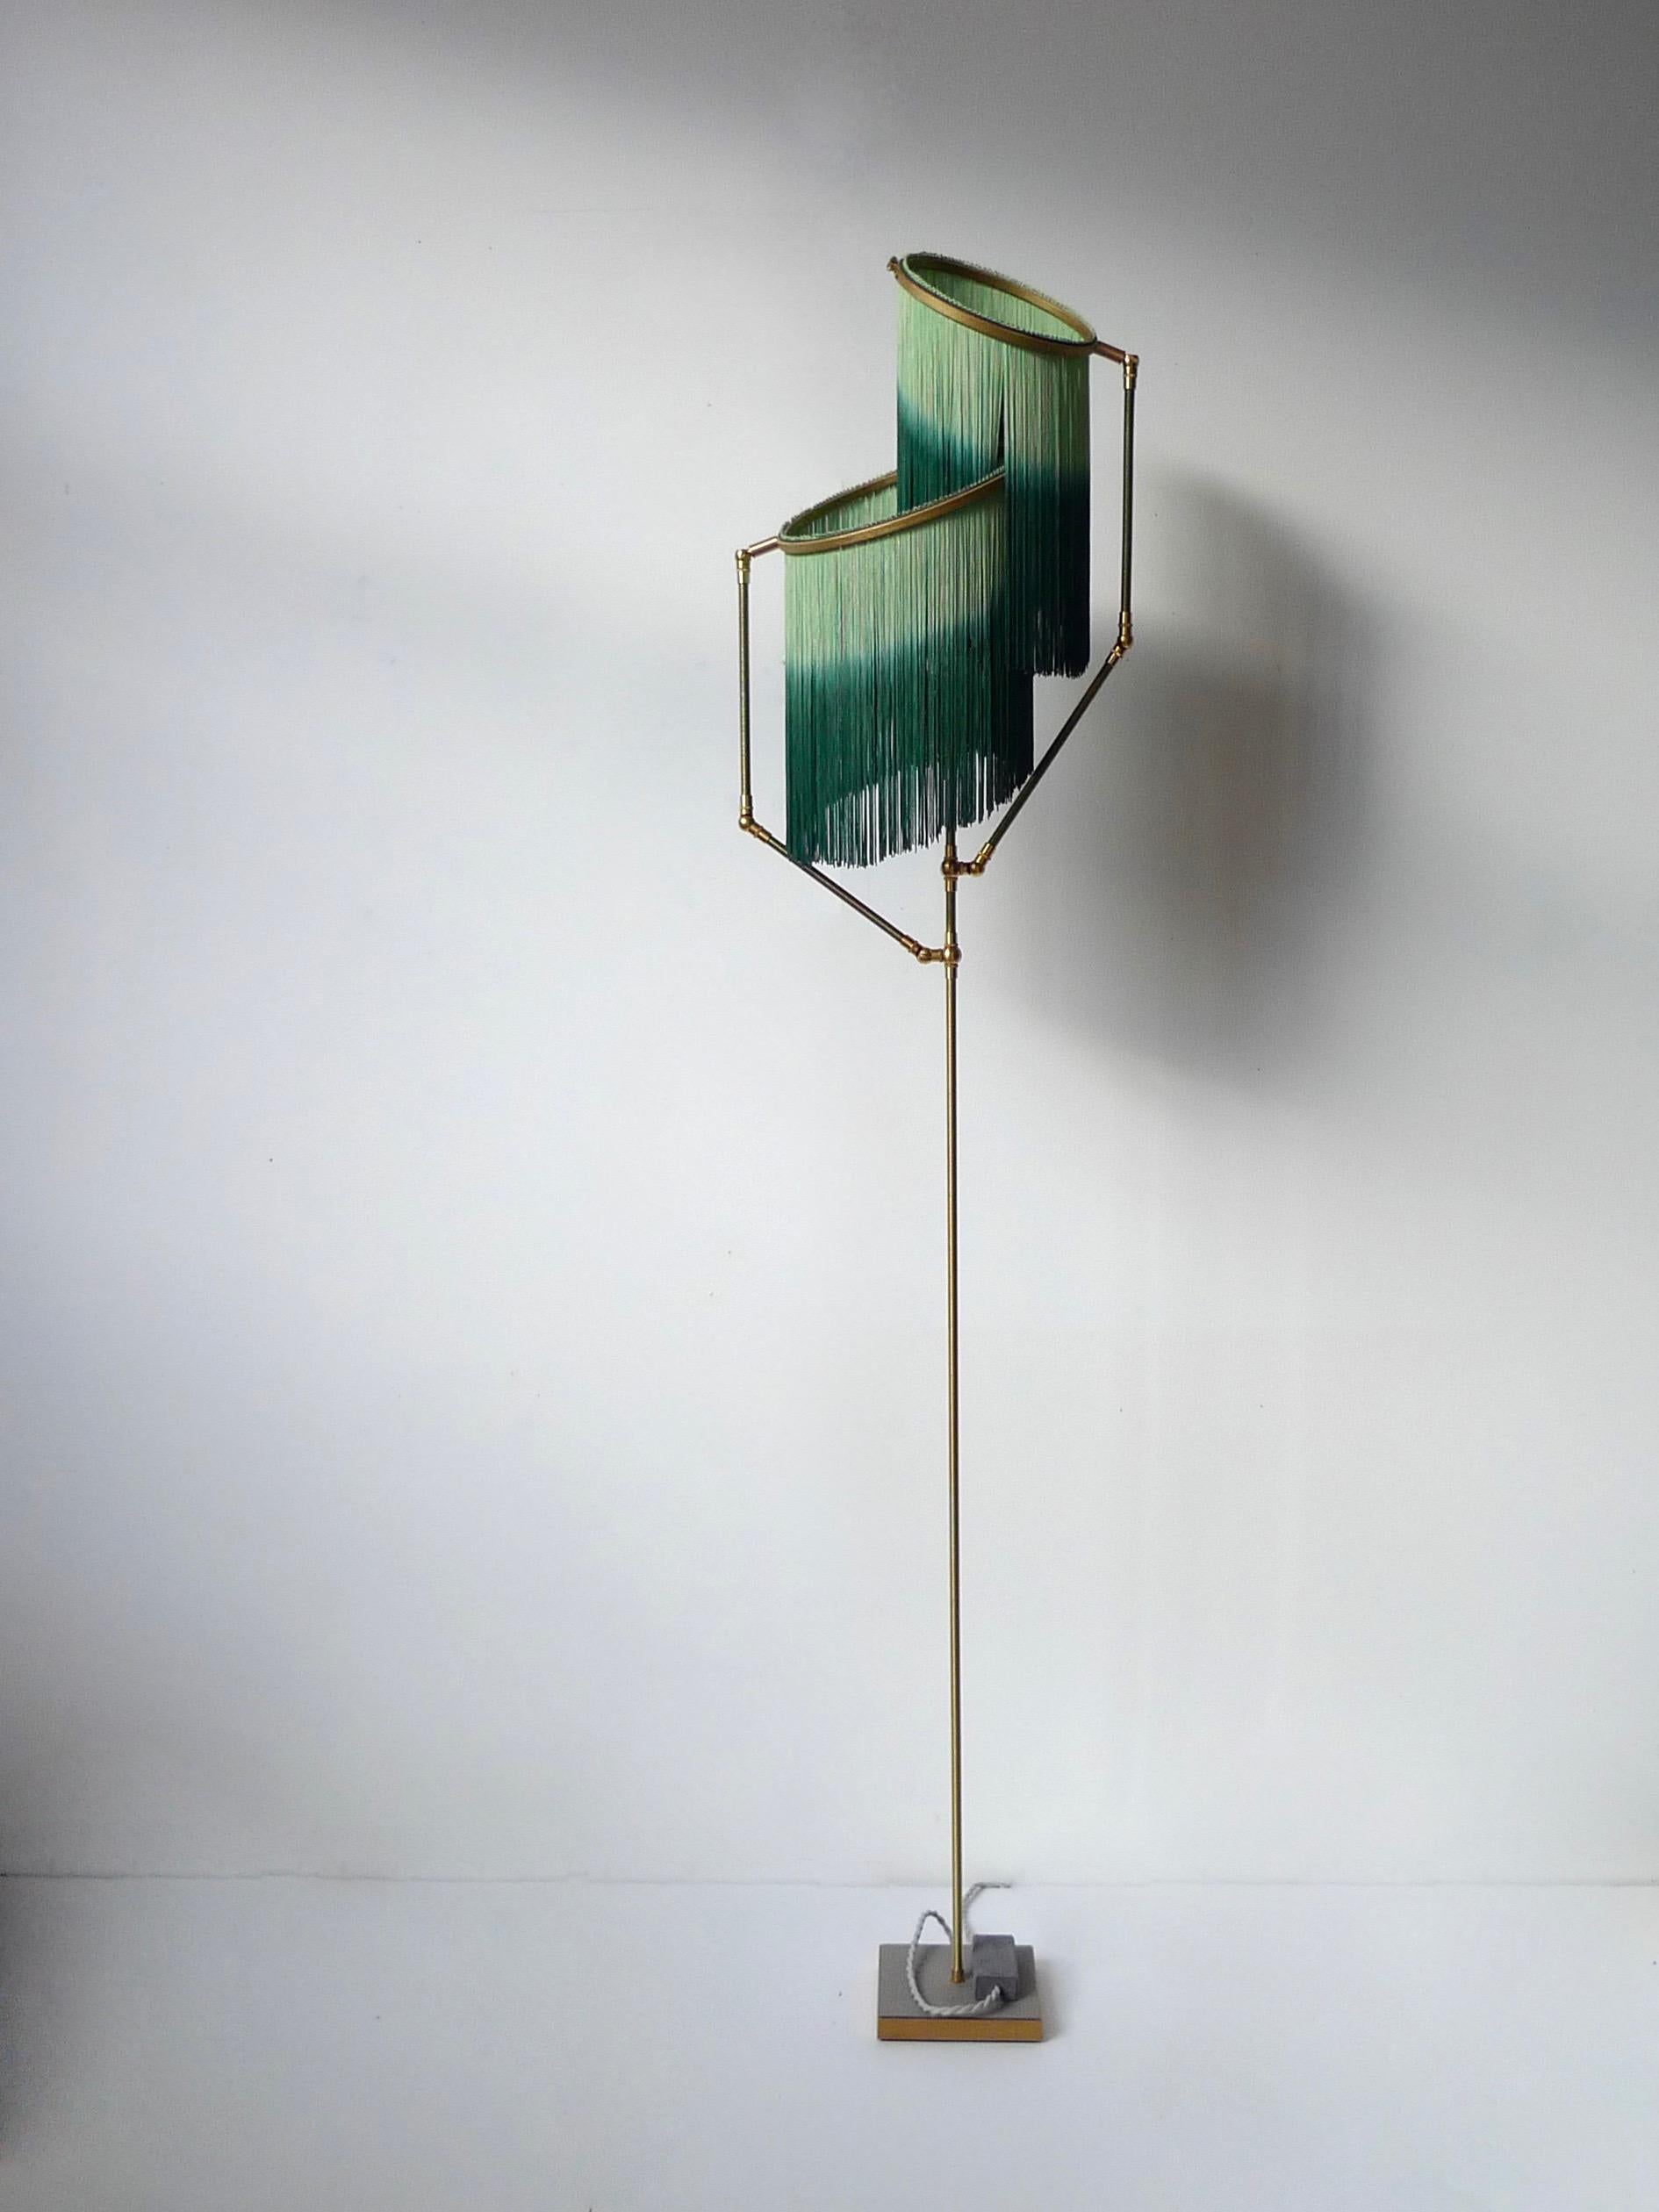 Green charme floor lamp, Sander Bottinga

Dimensions: H 153 x W 38 x D 25 cm

Handmade in brass, leather, wood and dip dyed colored Fringes in viscose.
The movable arms makes it possible to move the circles with fringes in different